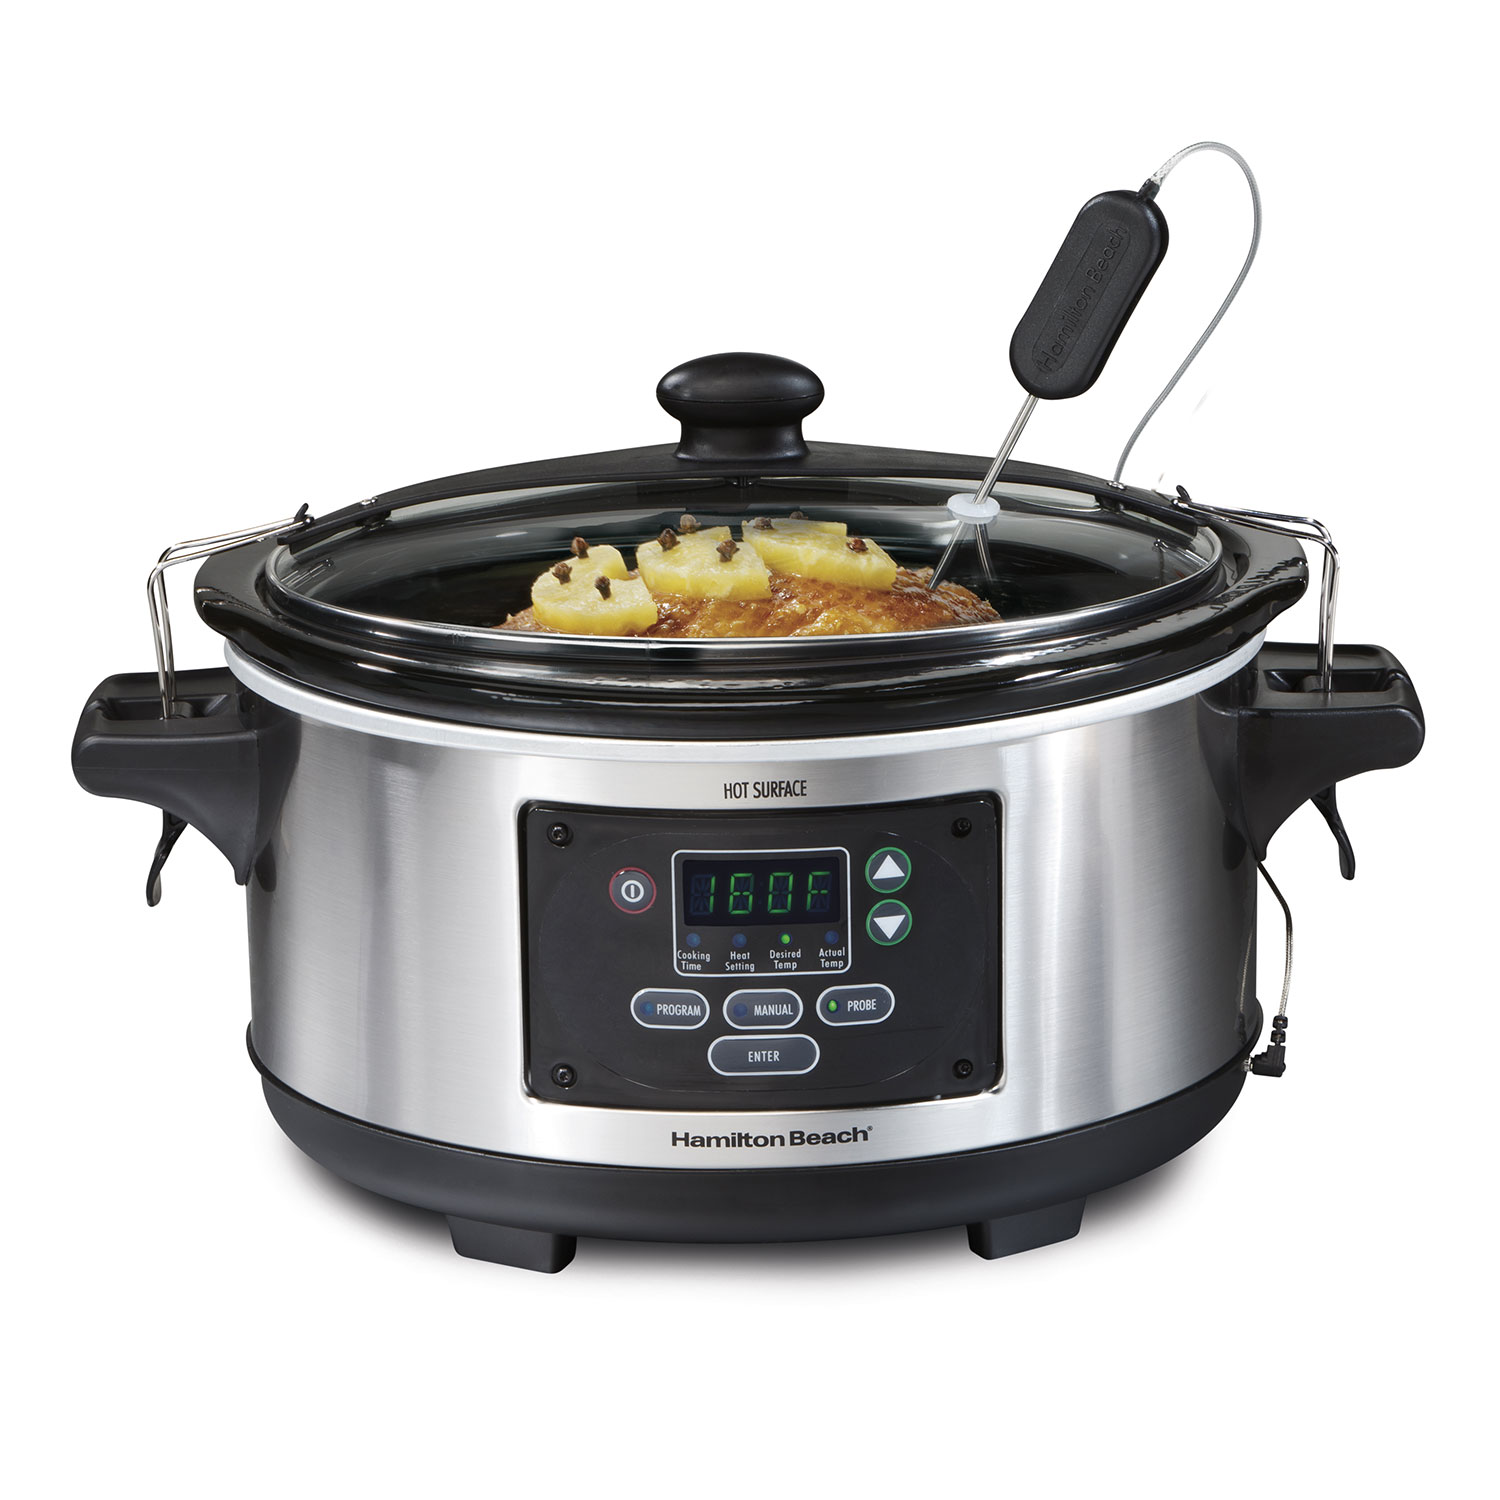 Set & Forget®6 Qt. Programmable Slow Cooker, Stainelss Steel (33969A)